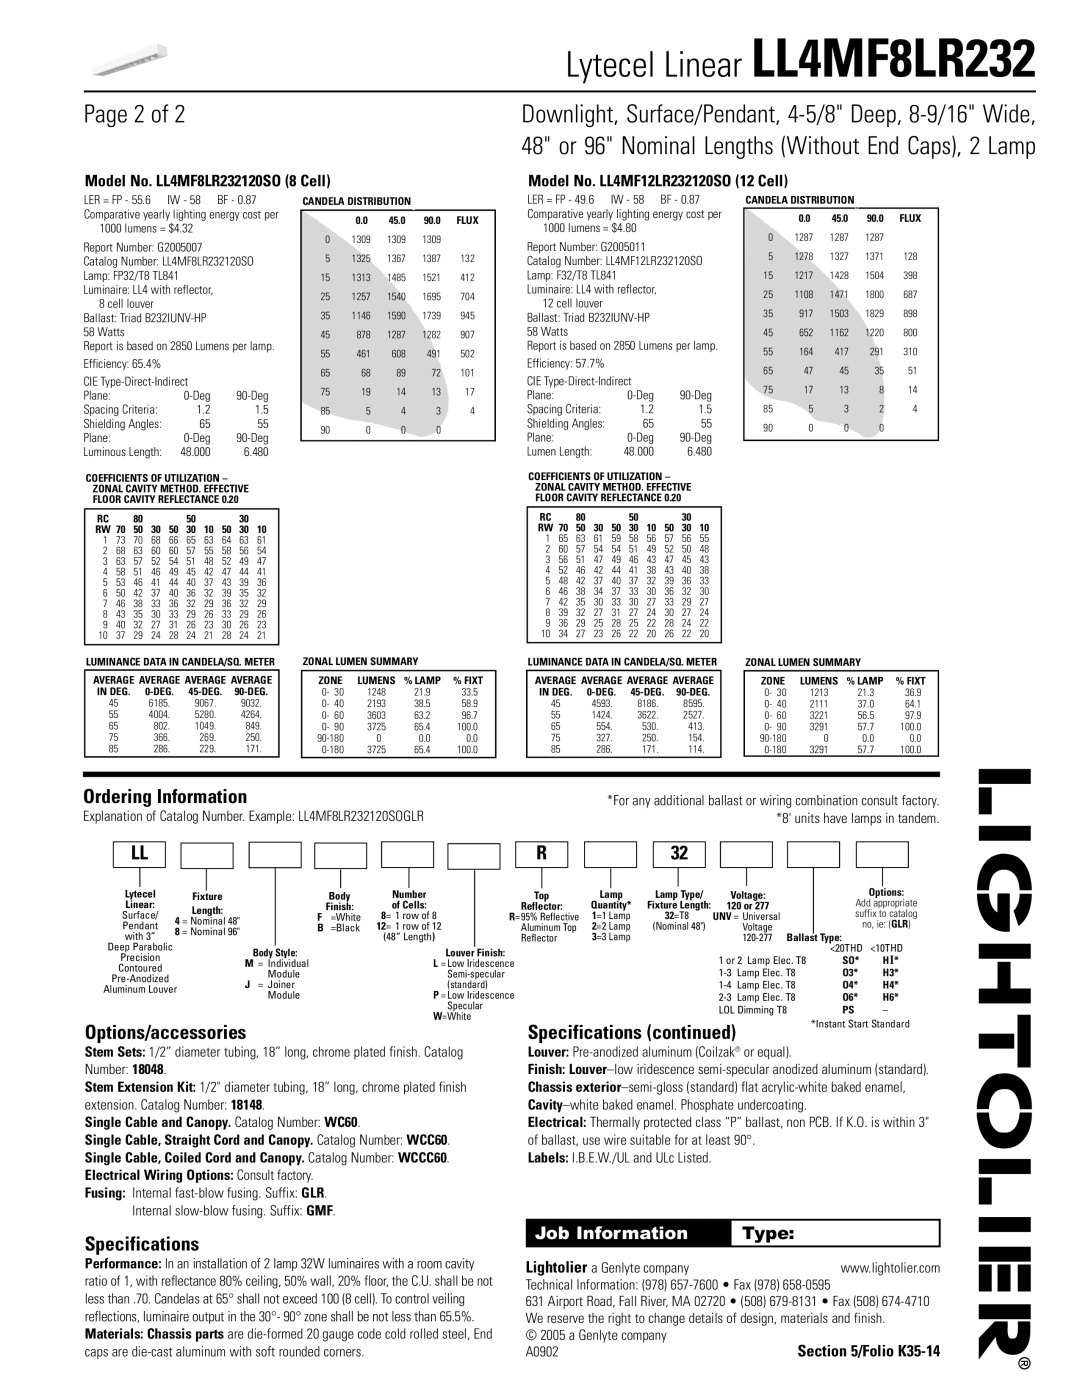 Lightolier LL4MF8LR232 Page 2 of, Ordering Information, Options/accessories, Specifications continued, Job Information 